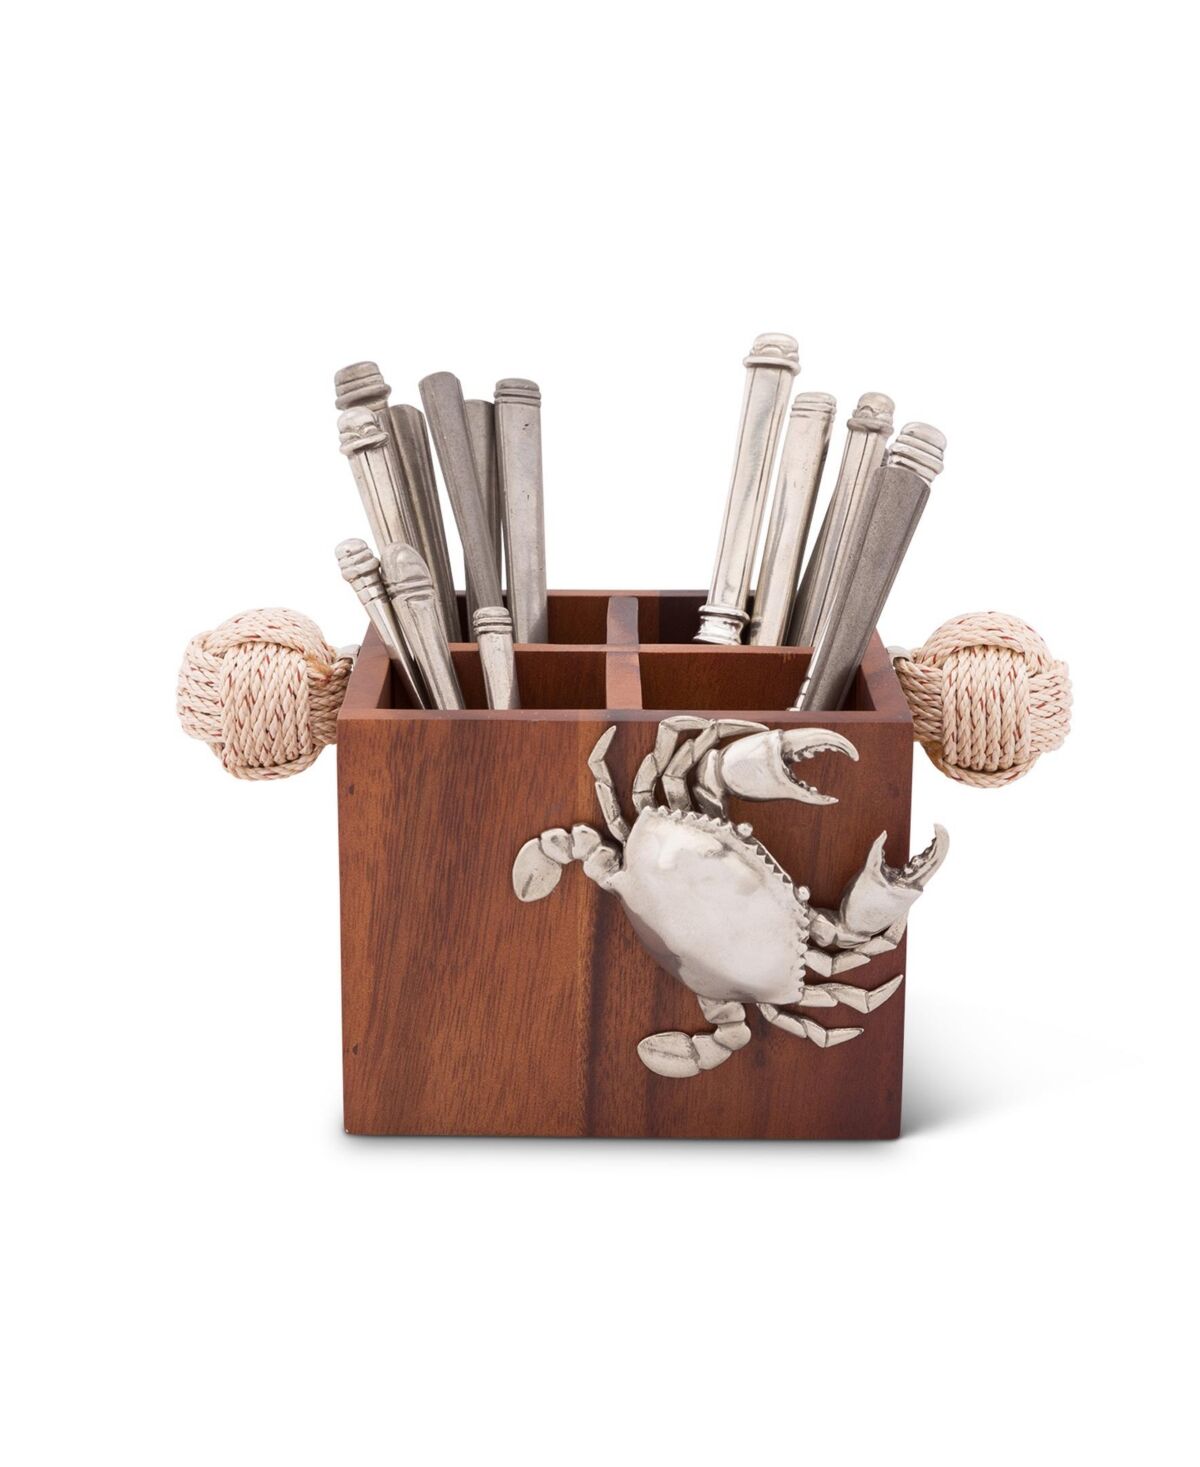 Vagabond House Caddy Square Acacia Wood Flatware, Serve Ware, Utensil, Carry-All Holder with Solid Pewter Crab Accent and Real Rope Handles, 4 Compart